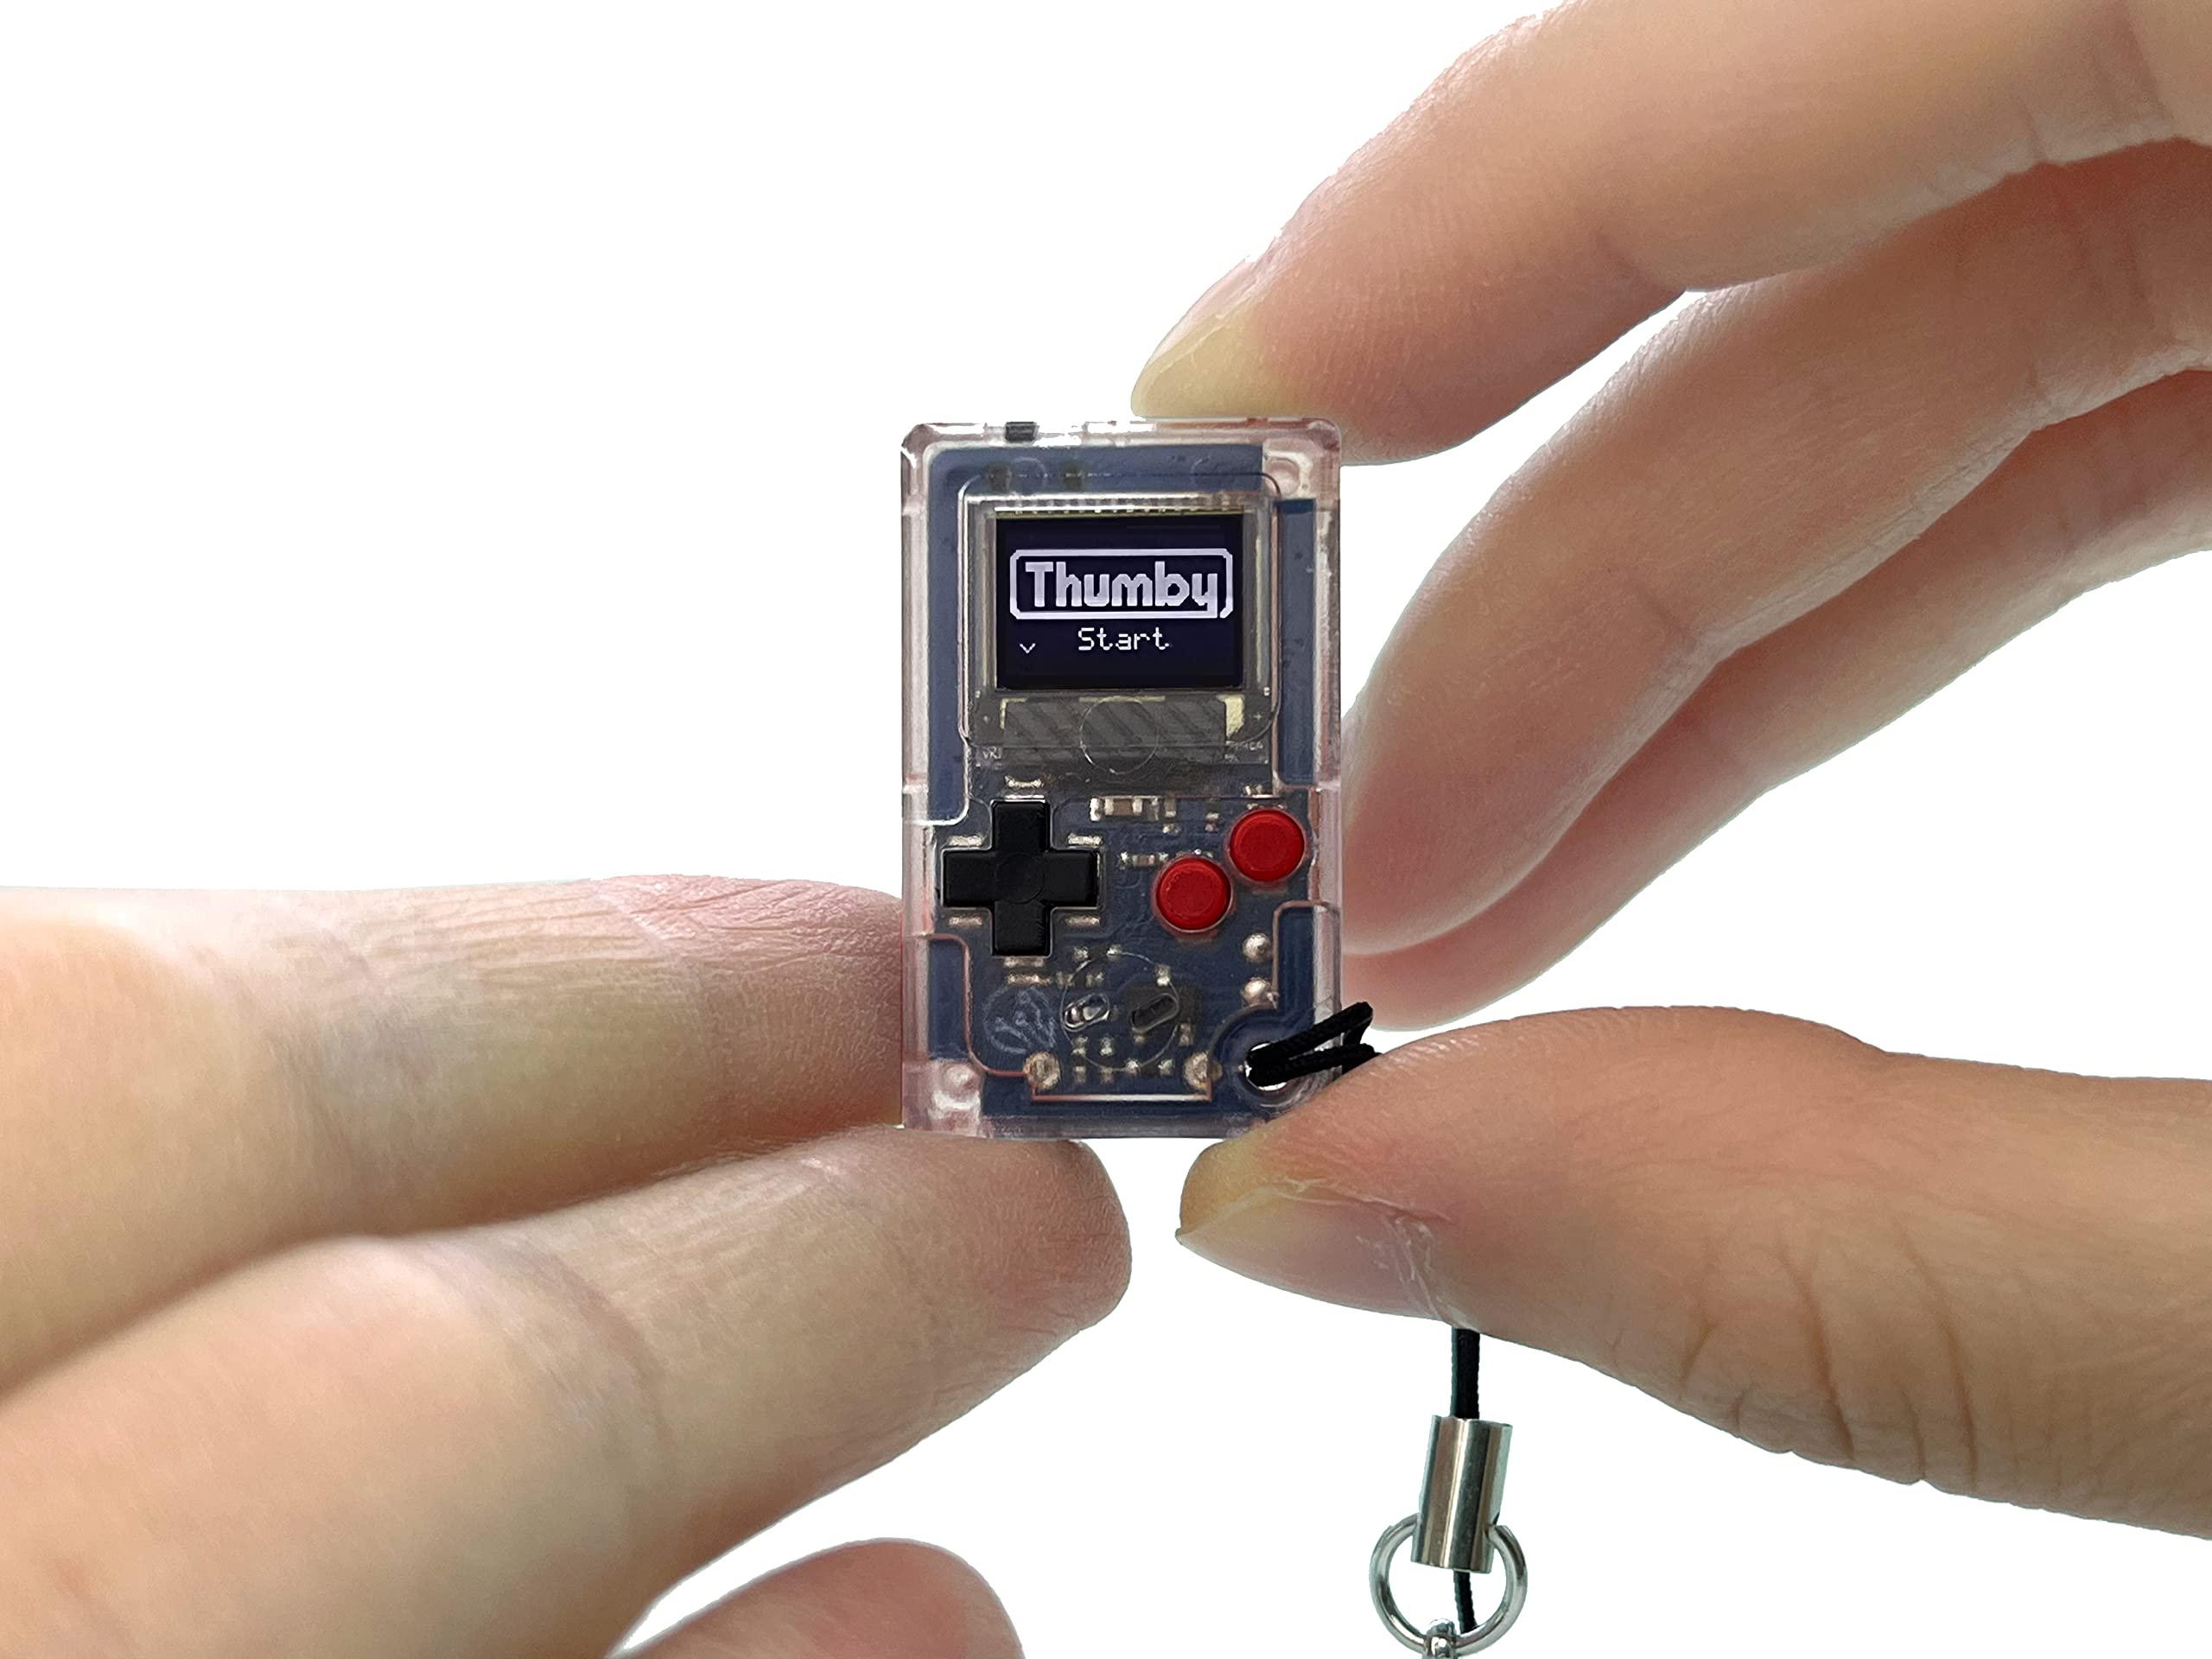 tinycircuits thumby (clear), tiny game console, playable programmable keychain: electronic miniature, stem learning tool